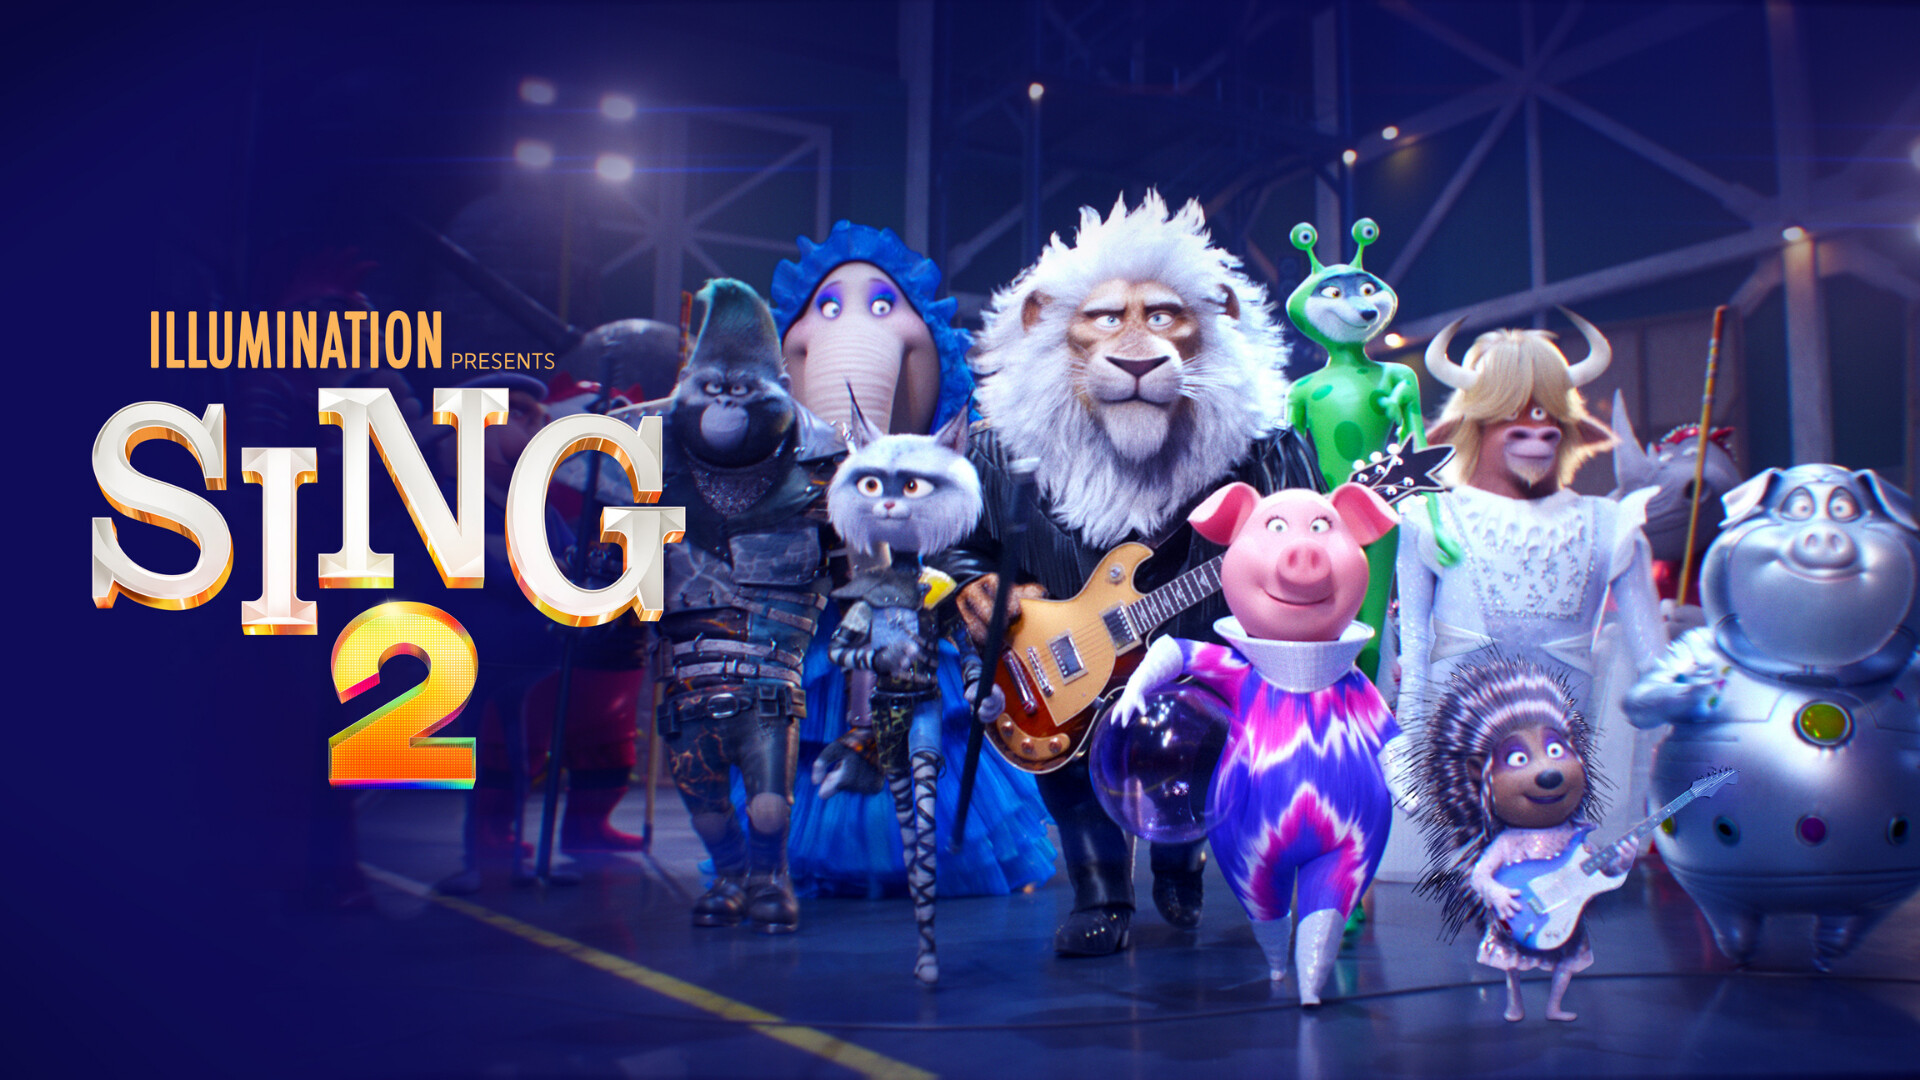 Sing 2: Released in theaters on Dec. 22, 2021, The sequel to 2016's movie. 1920x1080 Full HD Background.